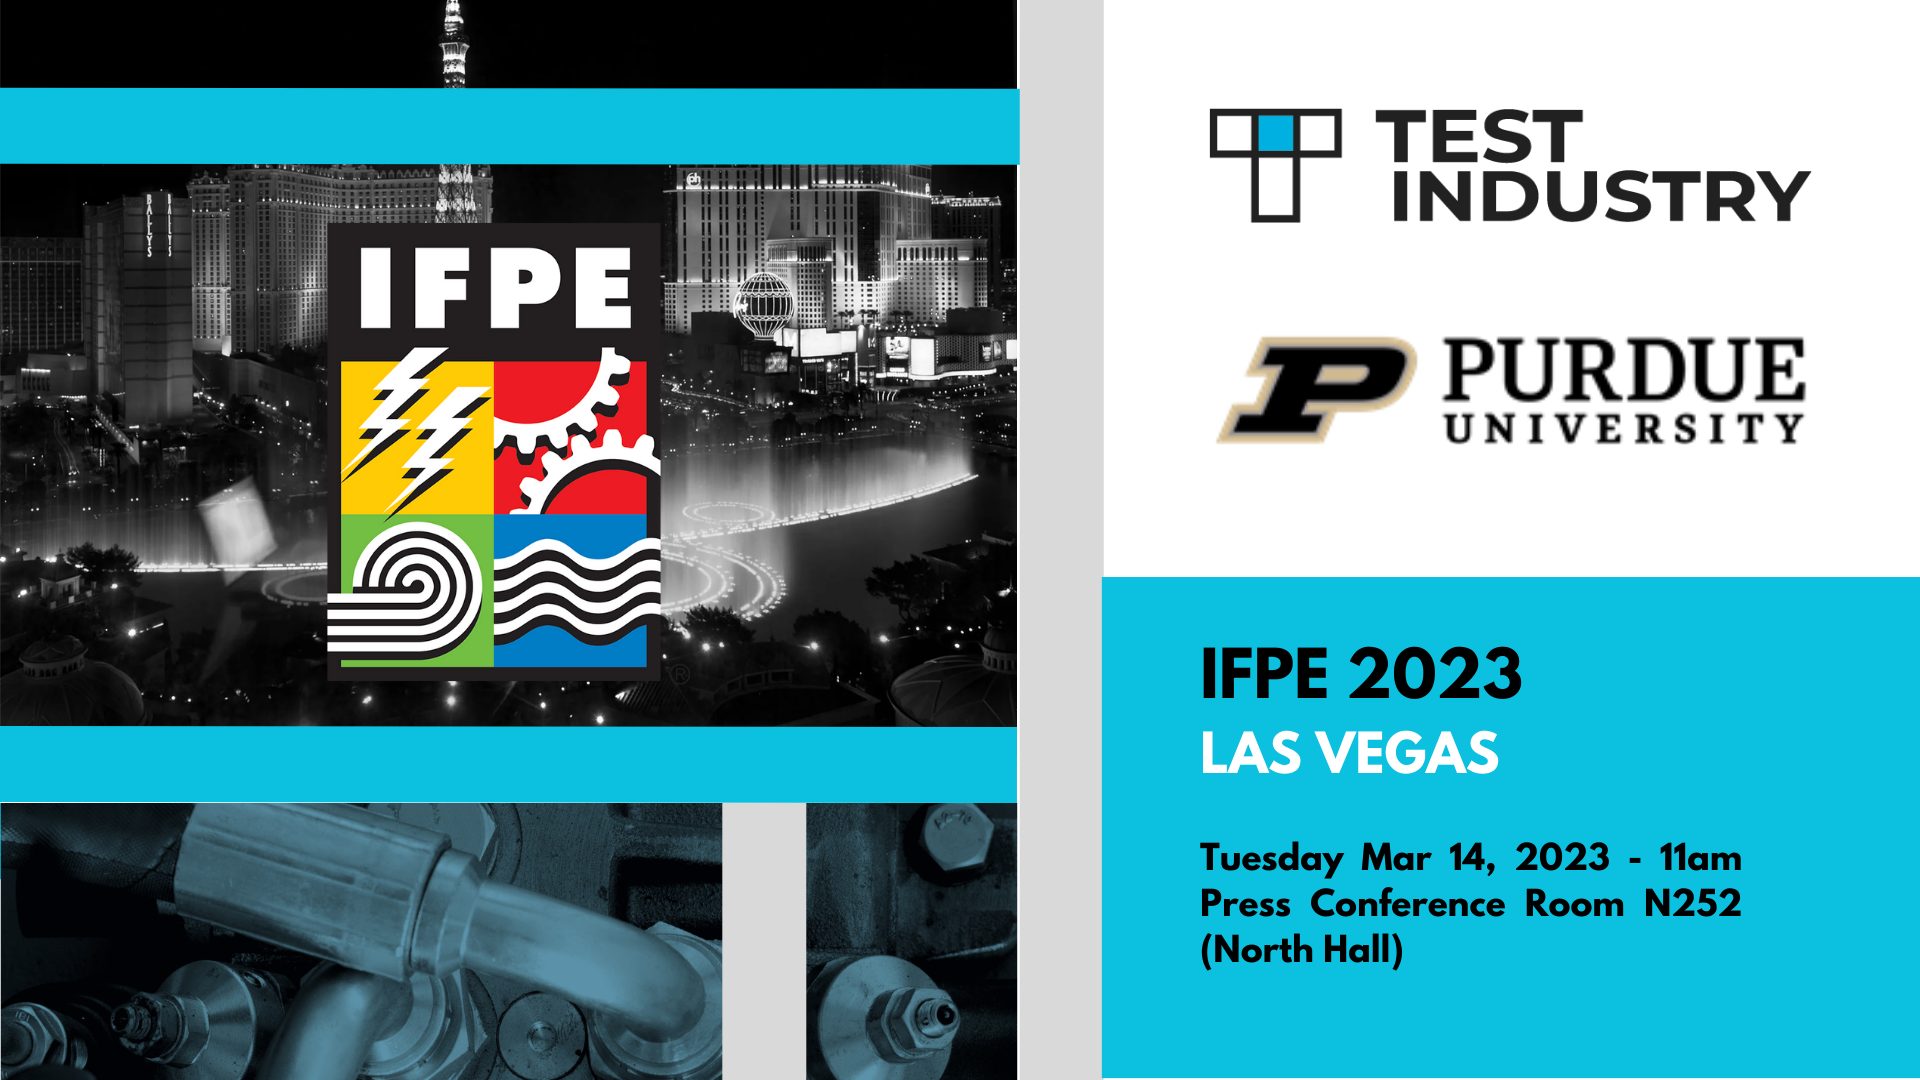 IFPE LAS VEGAS TEST INDUSTRY PRESS CONFERENCE WITH PURDUE UNIVERSITY – THE ROLE OF TRIBOLOGY IN SUSTAINABILITY